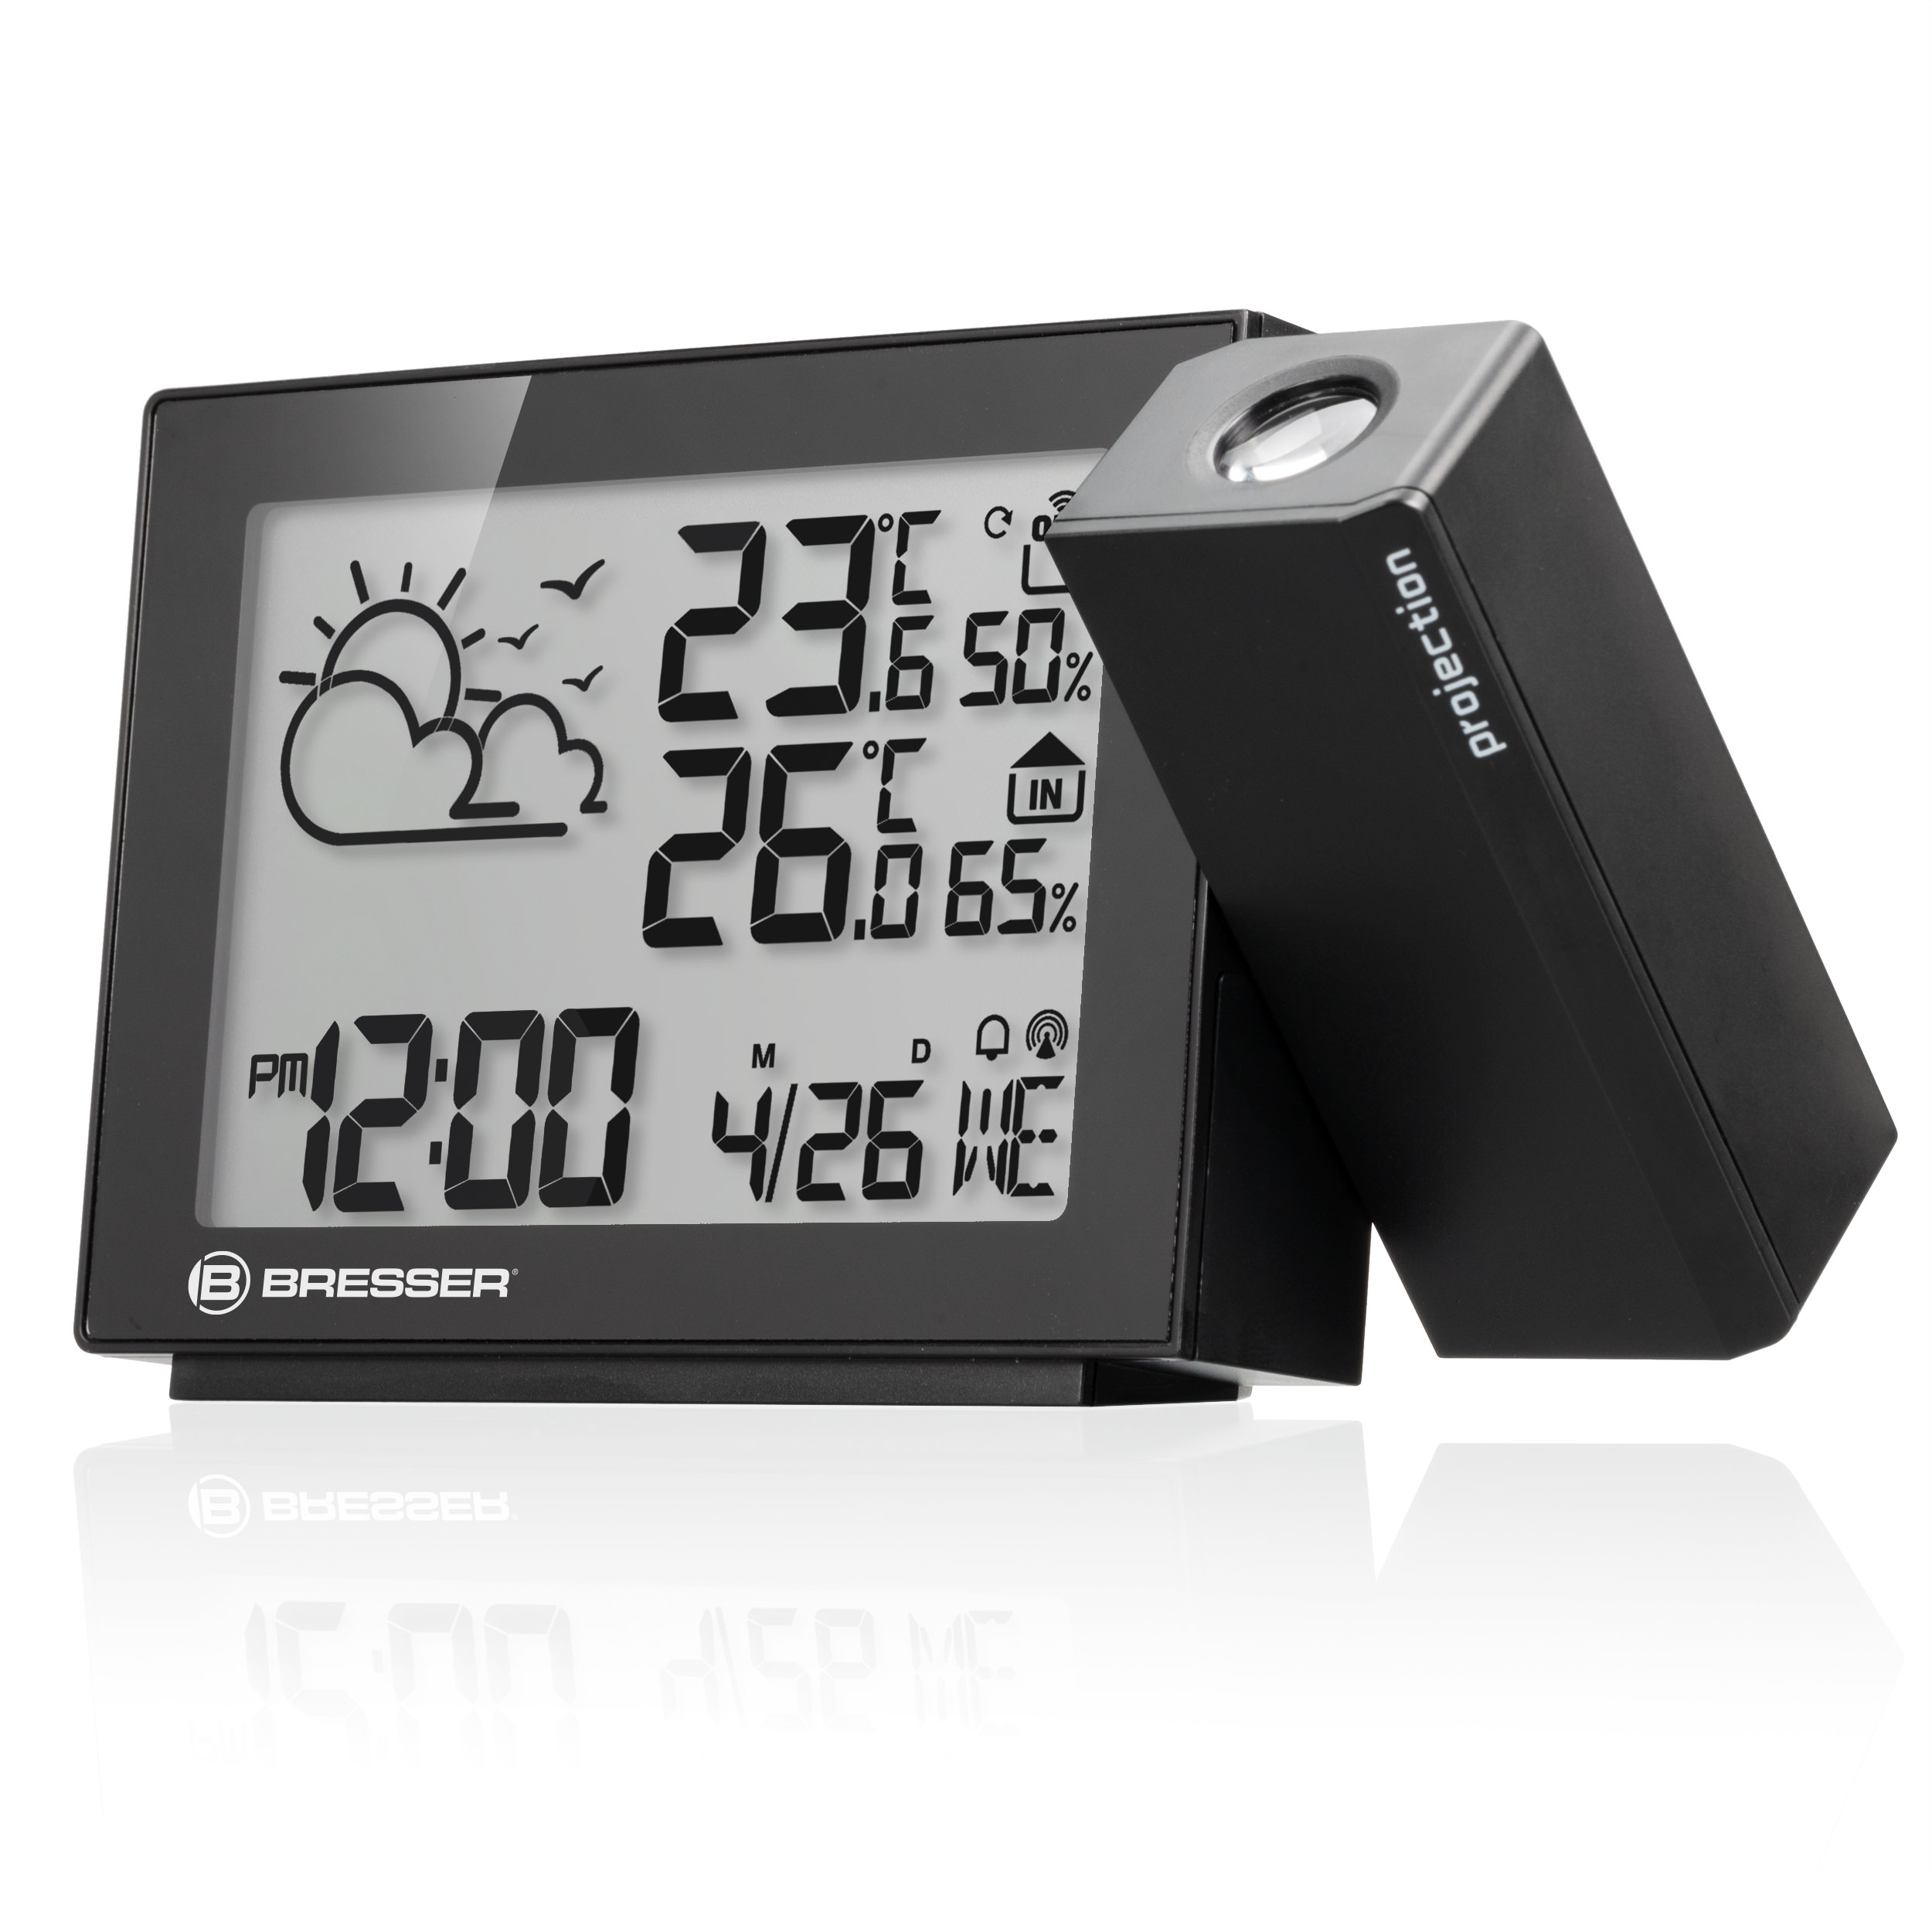 BRESSER Projection Radio-Controlled Weather Station MeteoTemp P